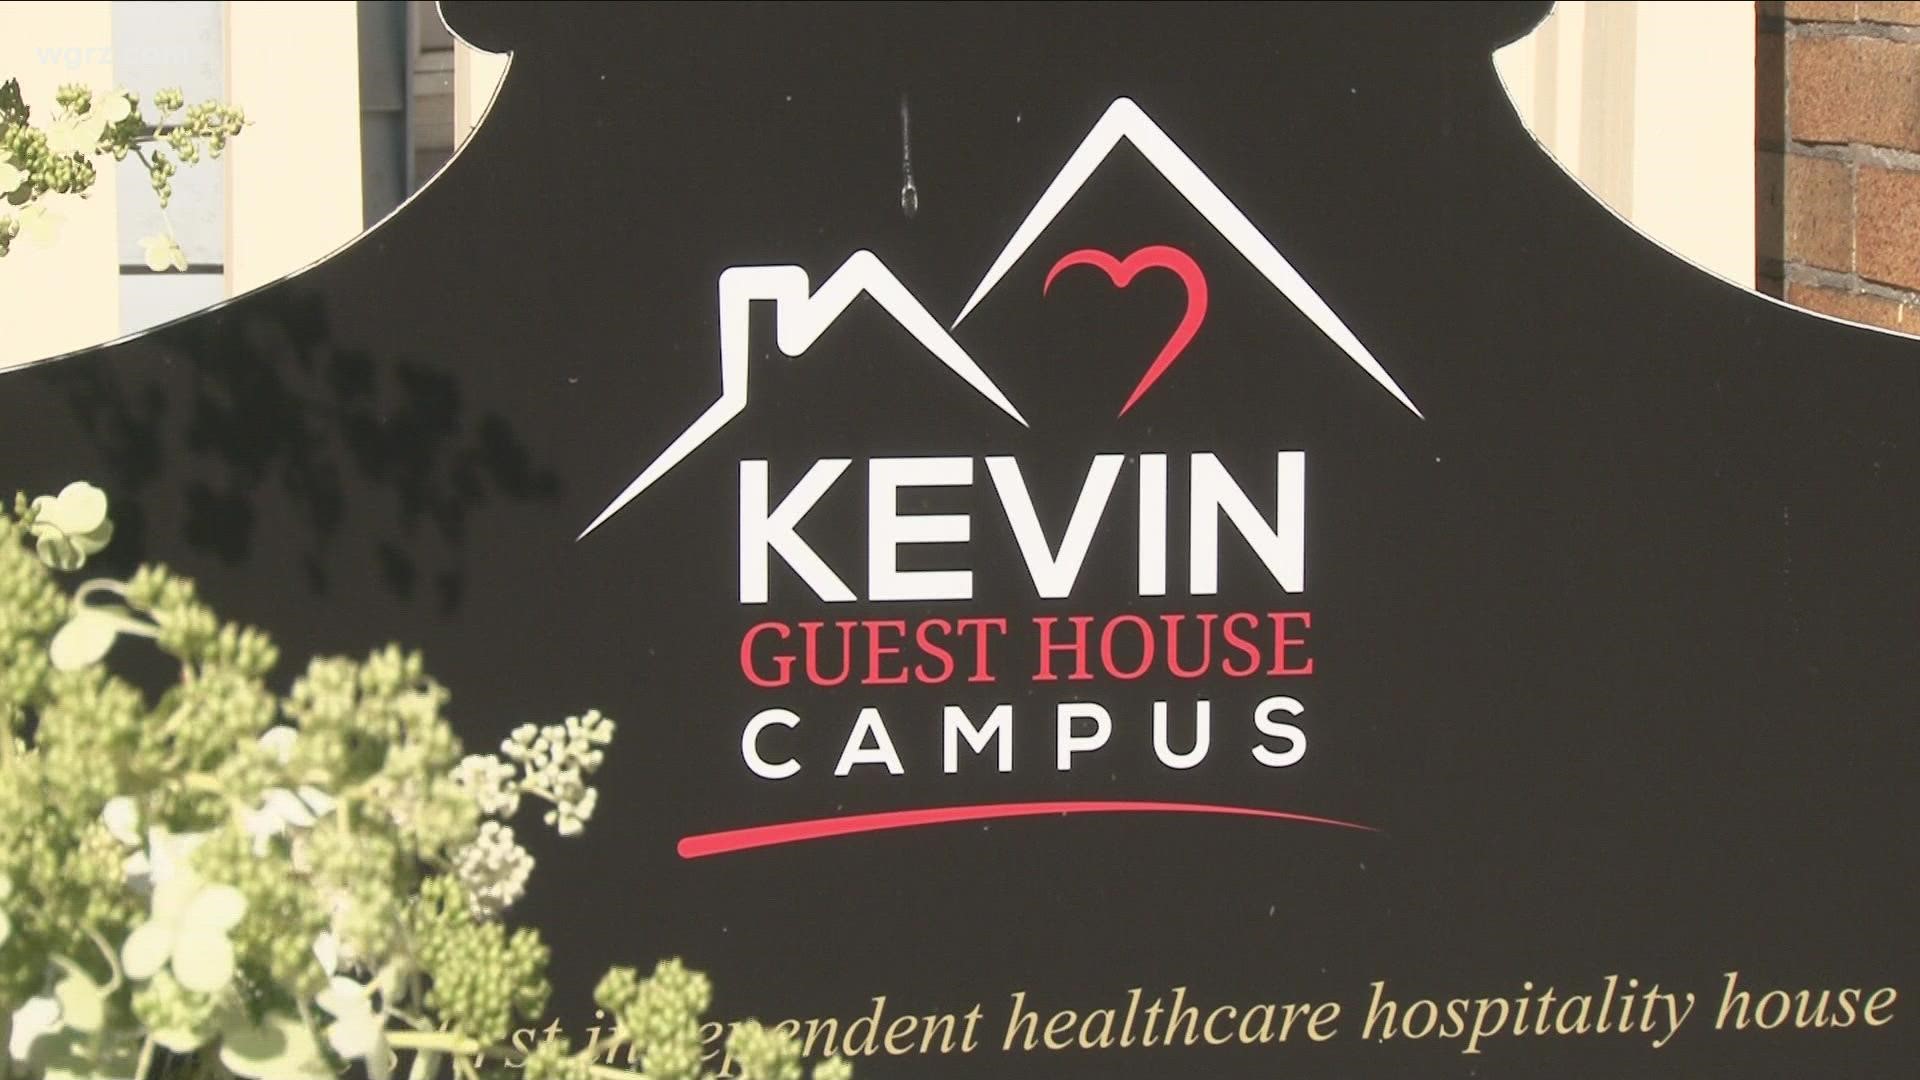 Tables and to-go meals are available until September 6th for this year's fundraiser for Buffalo's Kevin's Guest House